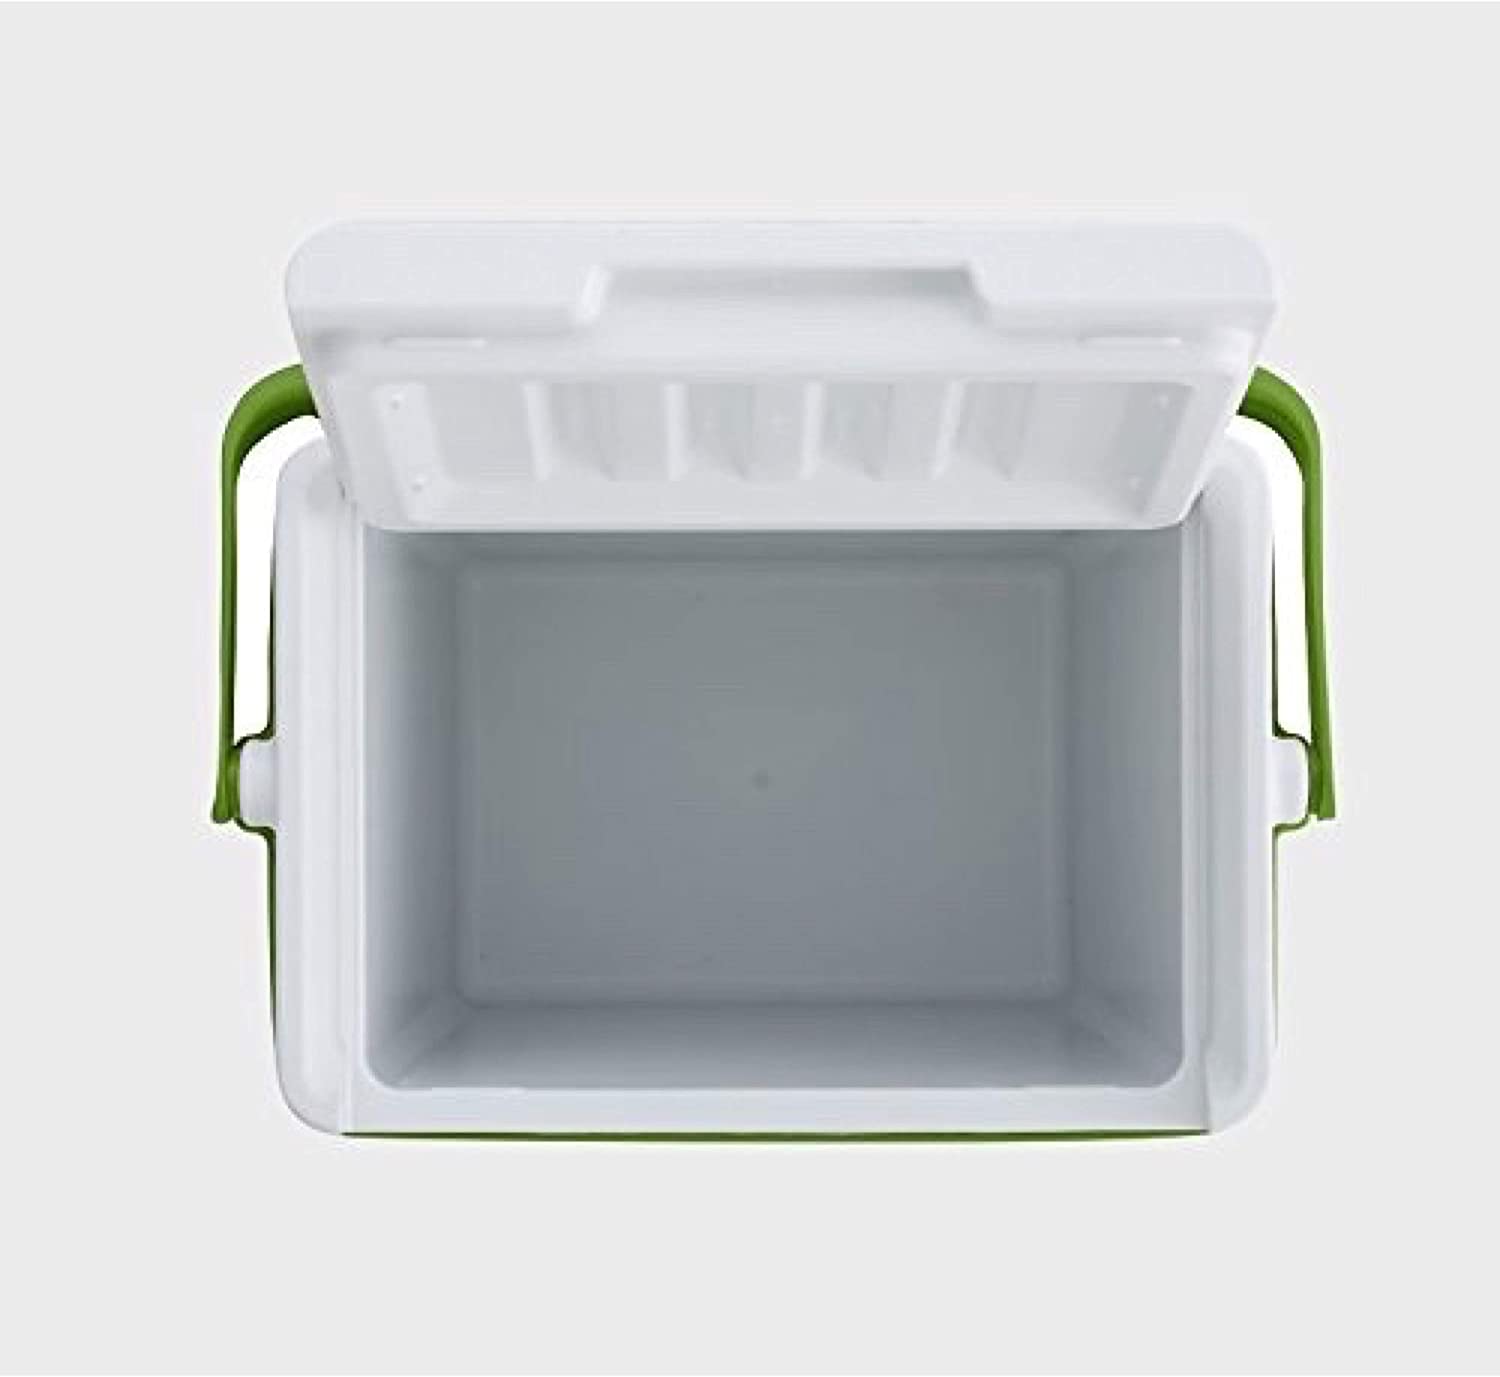 Coleman 18Qt 20-Can Party Stacker Cooler, Green - image 5 of 9